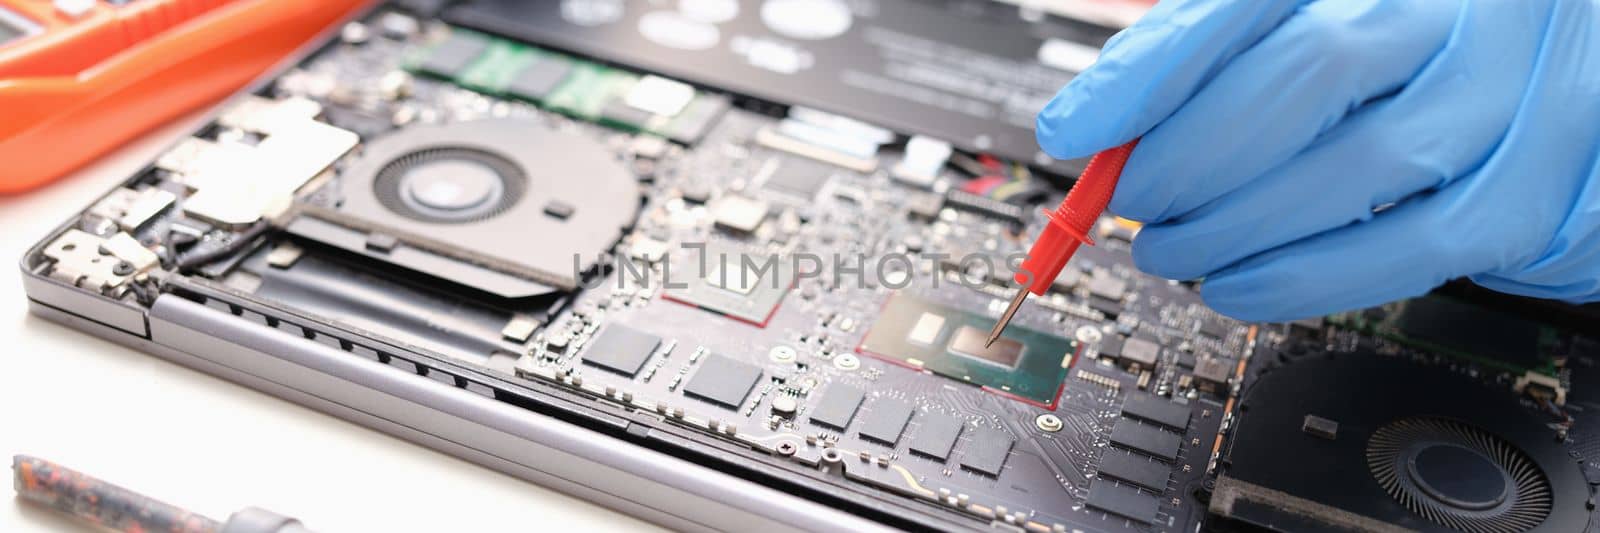 Technician measures the voltage on motherboard of computer electronic digital multimeter. PC diagnostics with multimeter concept